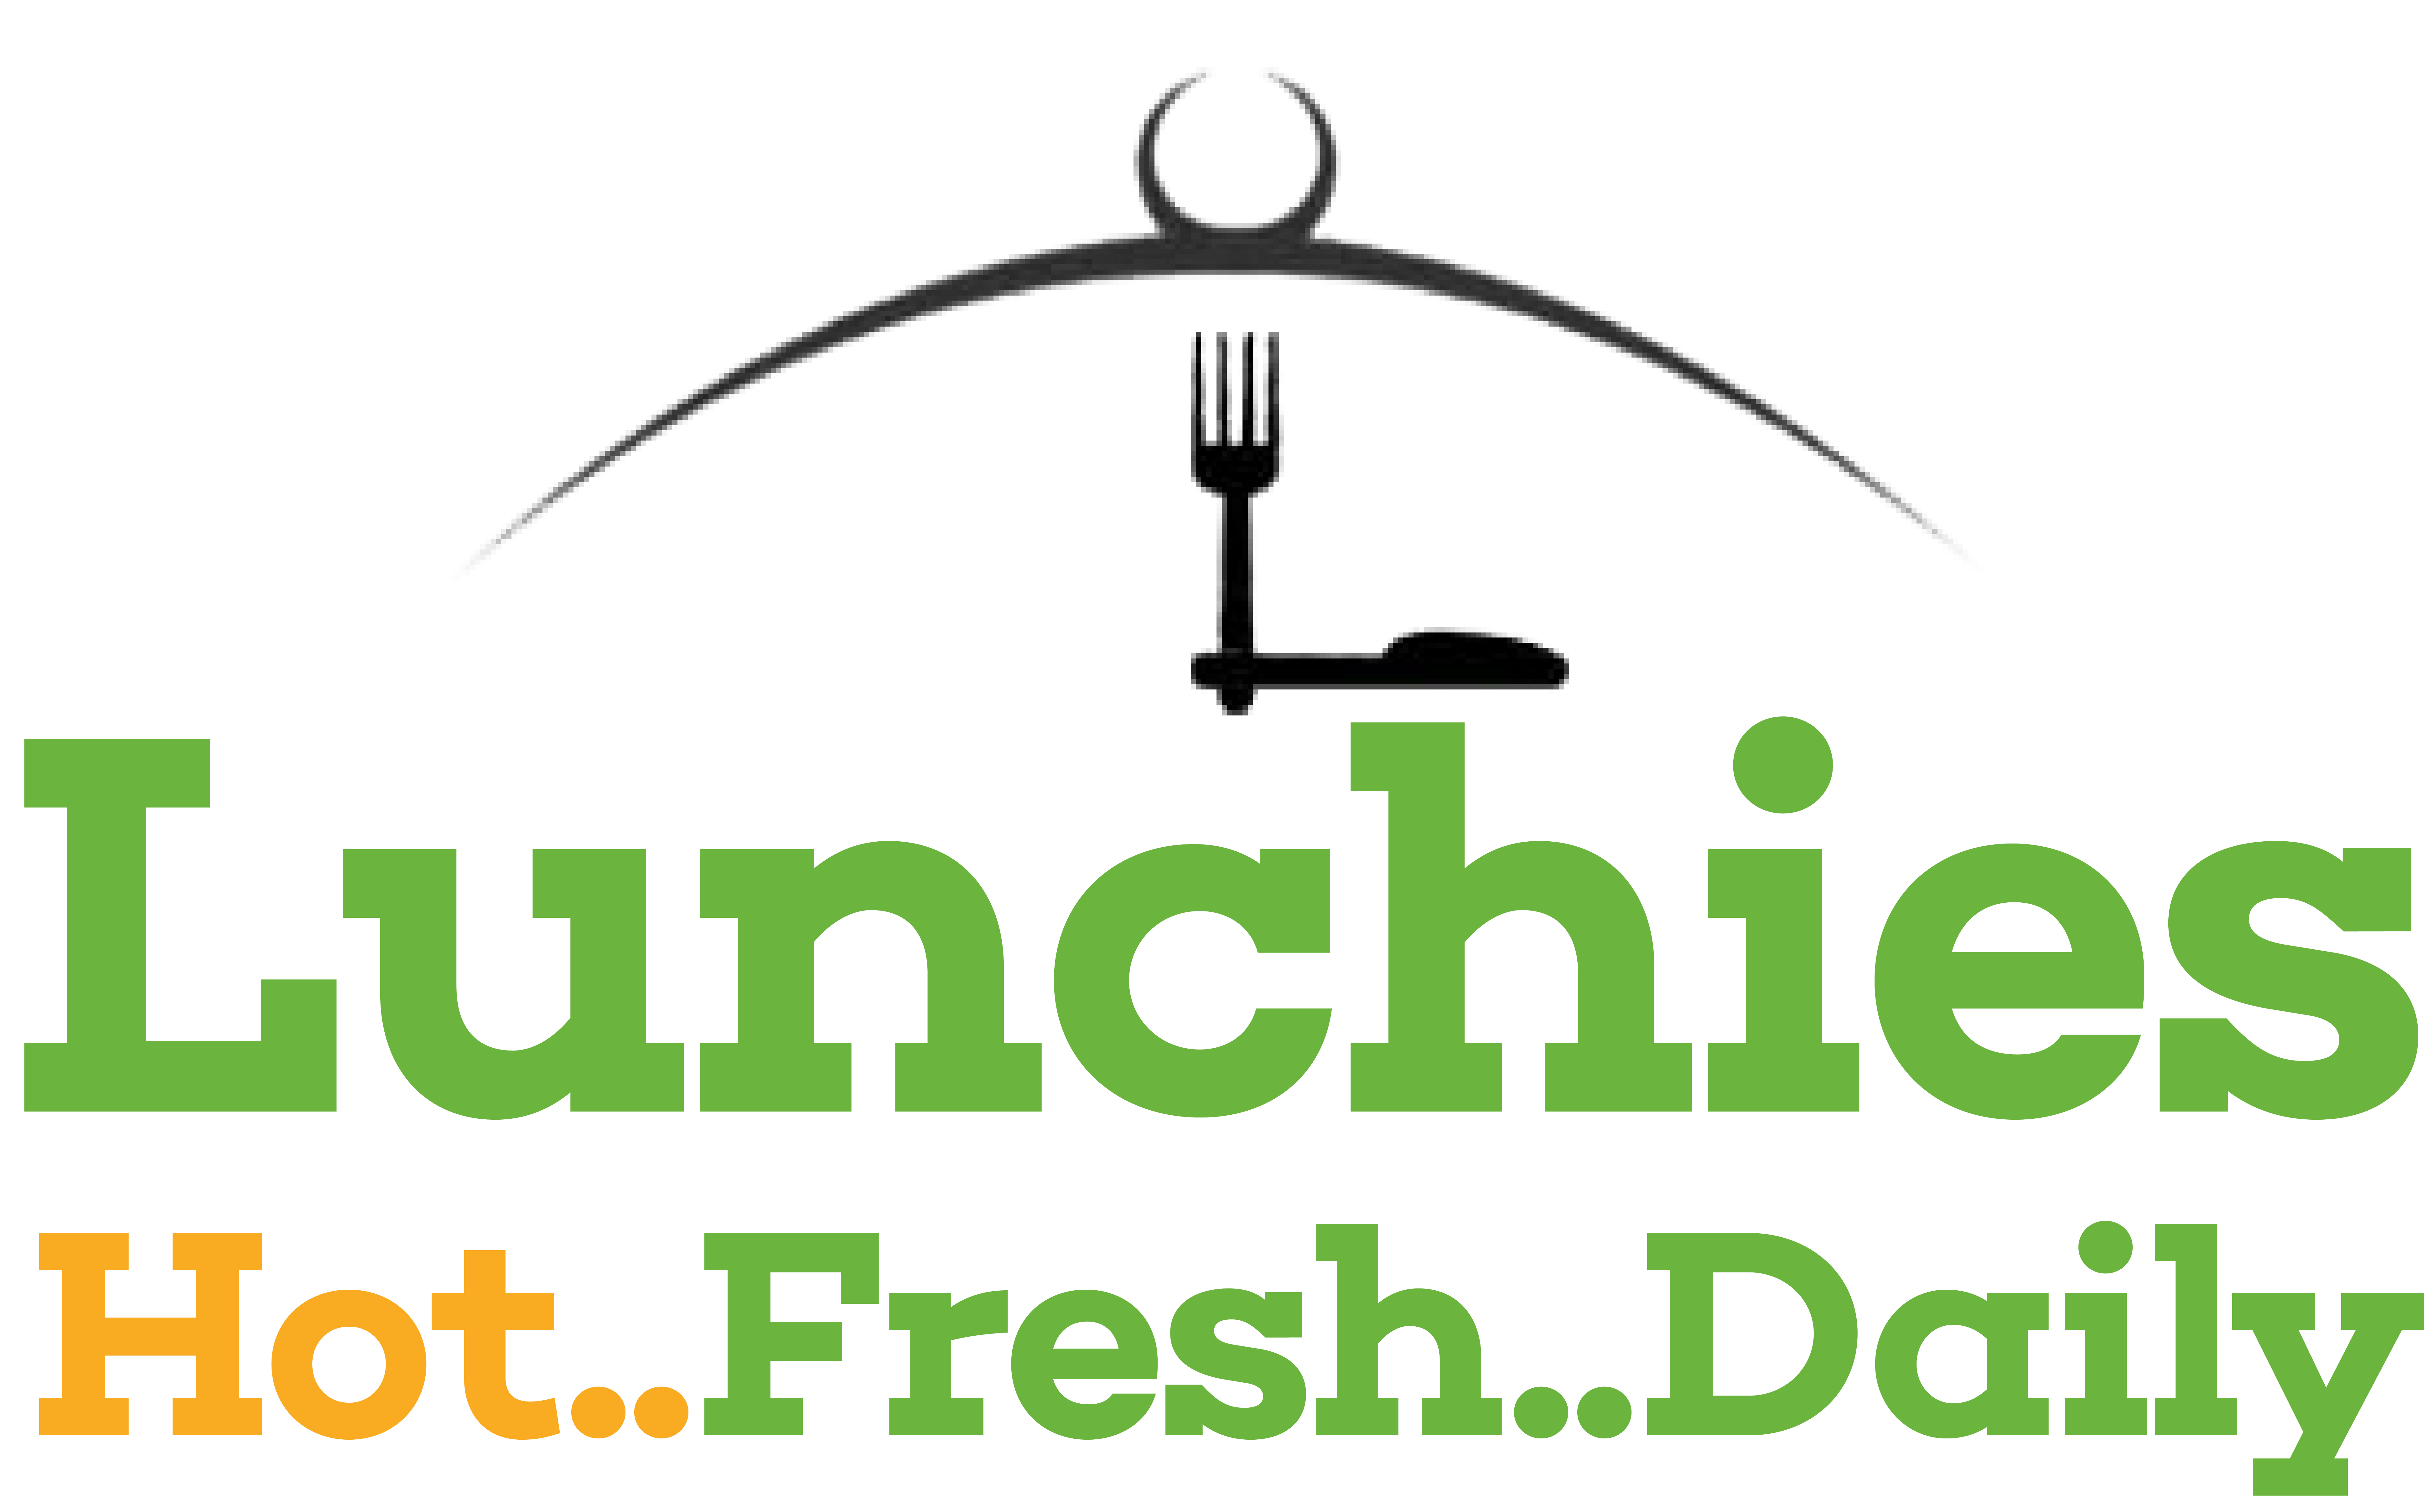 Local food delivery | Lunchies